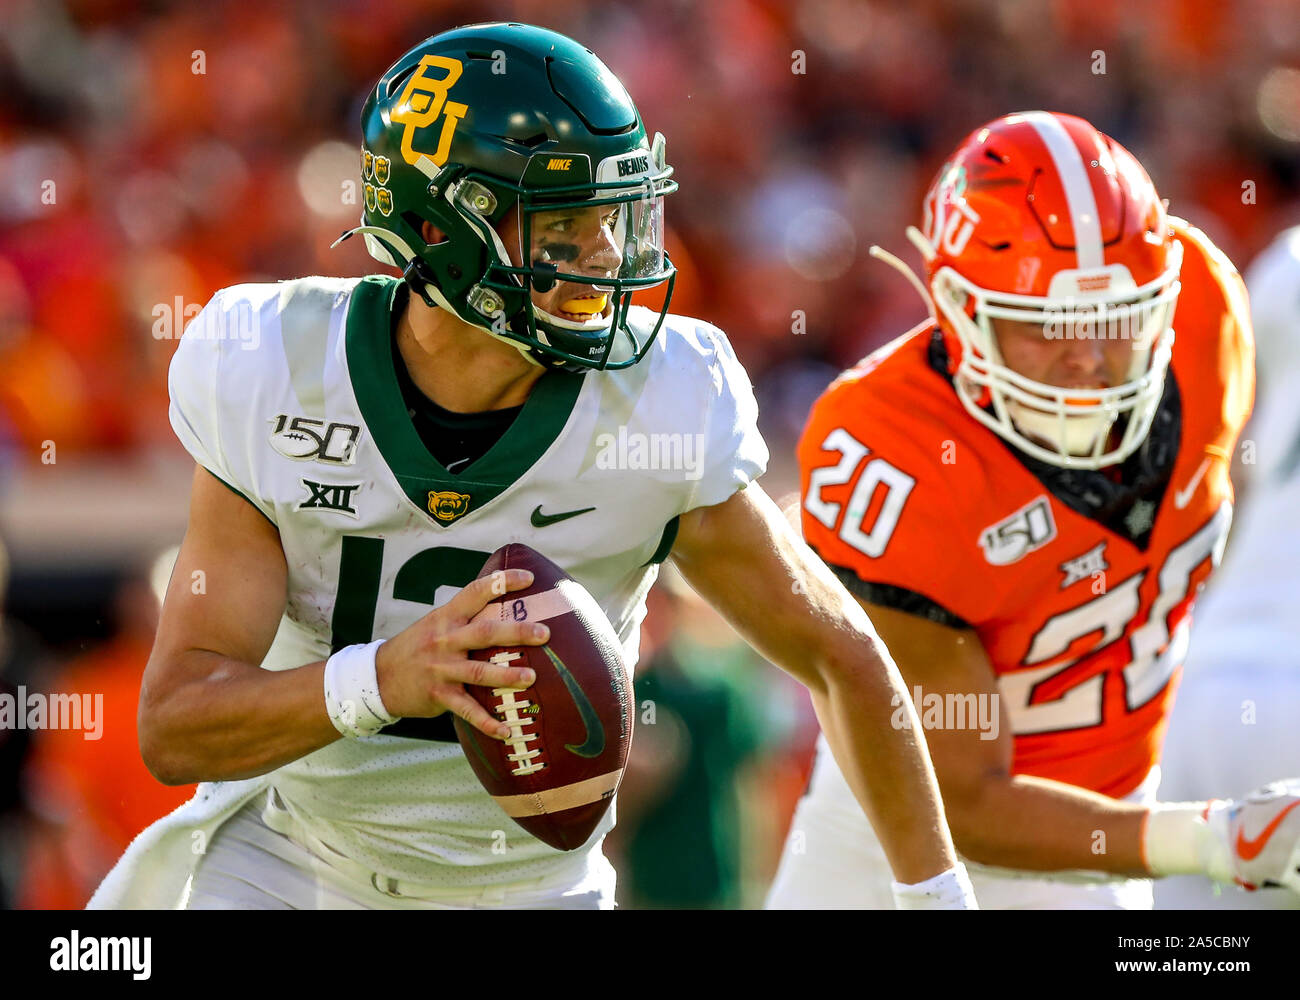 Stillwater, OK, USA. 19th Oct, 2019. Baylor University quarterback Charlie Brewer (12) during a football game between the Baylor University Bears and the Oklahoma State Cowboys at Boone Pickens Stadium in Stillwater, OK. Gray Siegel/CSM/Alamy Live News Stock Photo